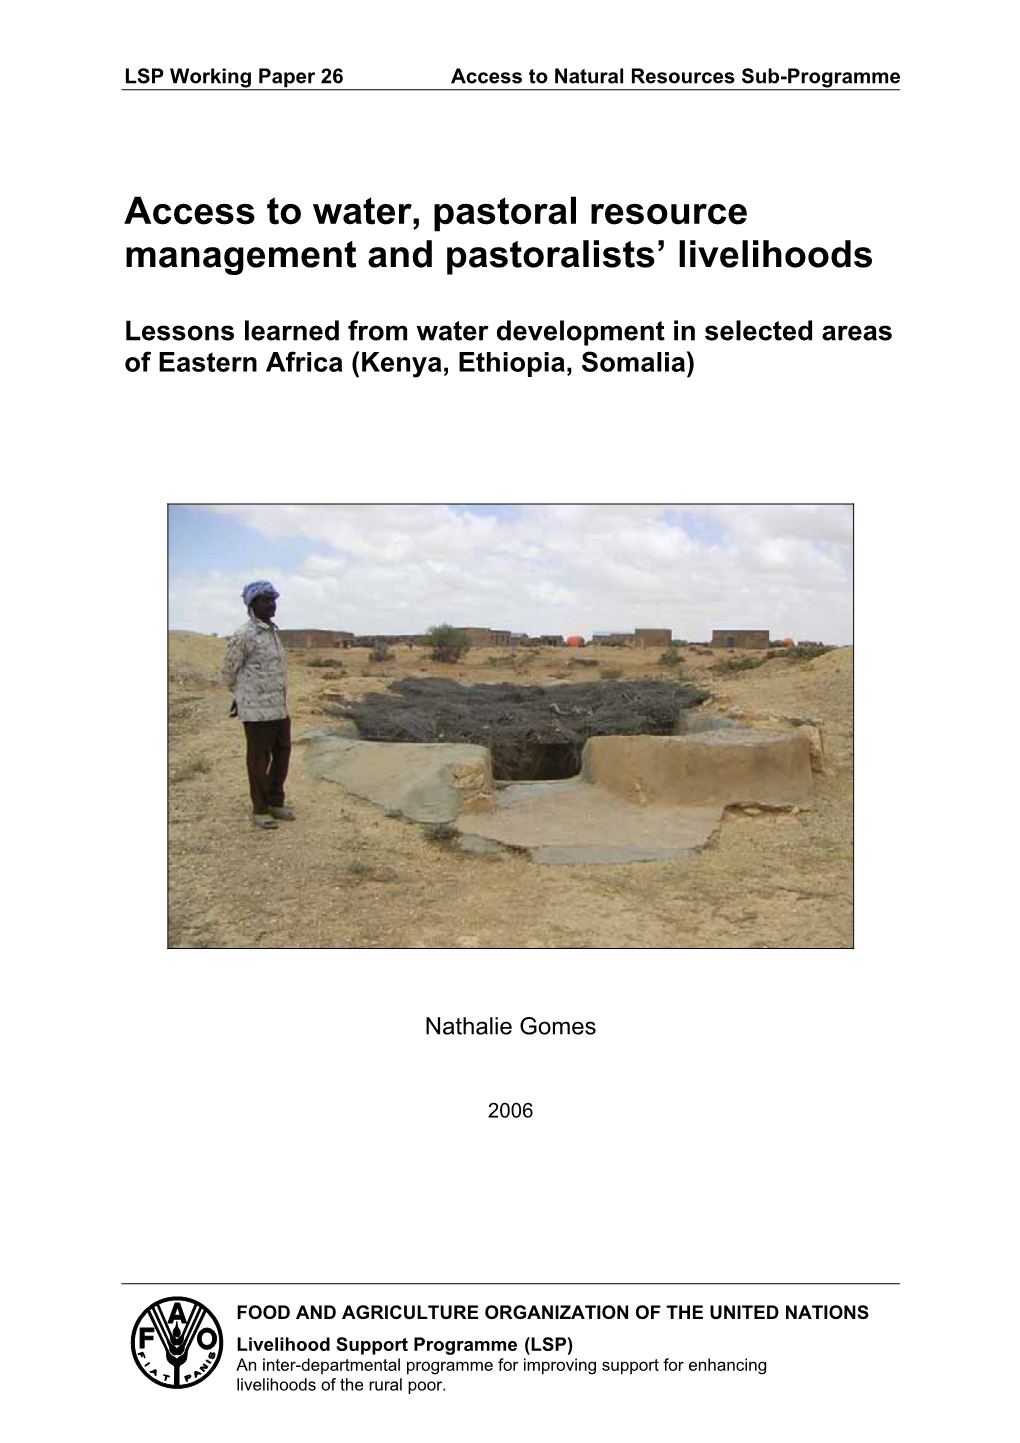 Access to Water, Pastoral Resource Management and Pastoralists’ Livelihoods